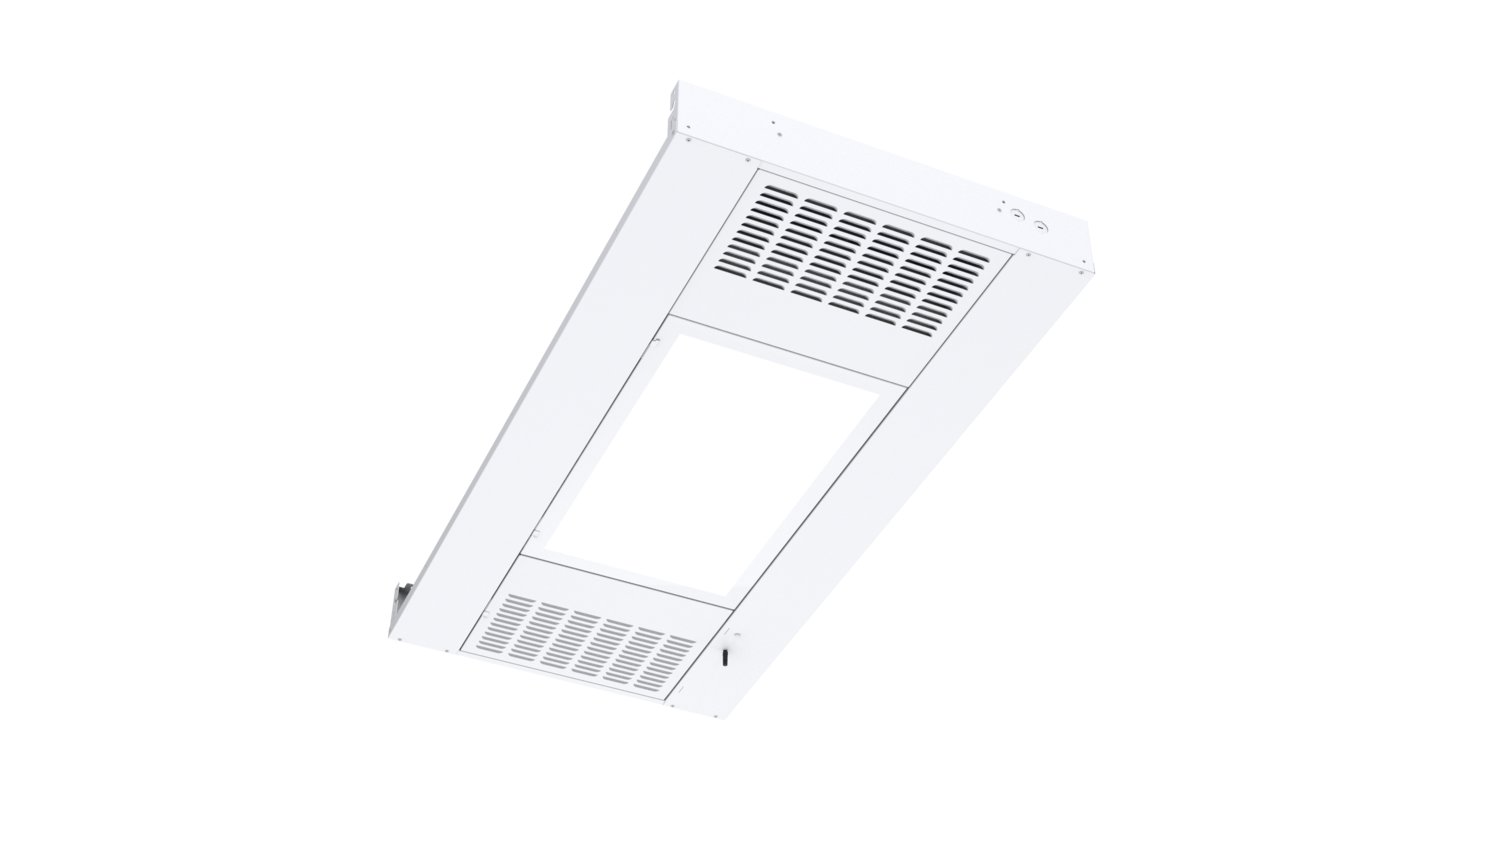 Called EvolvAIR UV with Downlight, the product continuously circulates pathogen-contaminated air through a sealed chamber, where the air is treated with a high-intensity ultraviolet light to inactivate bacteria, fungus and viruses. The treated air is then returned to the room.